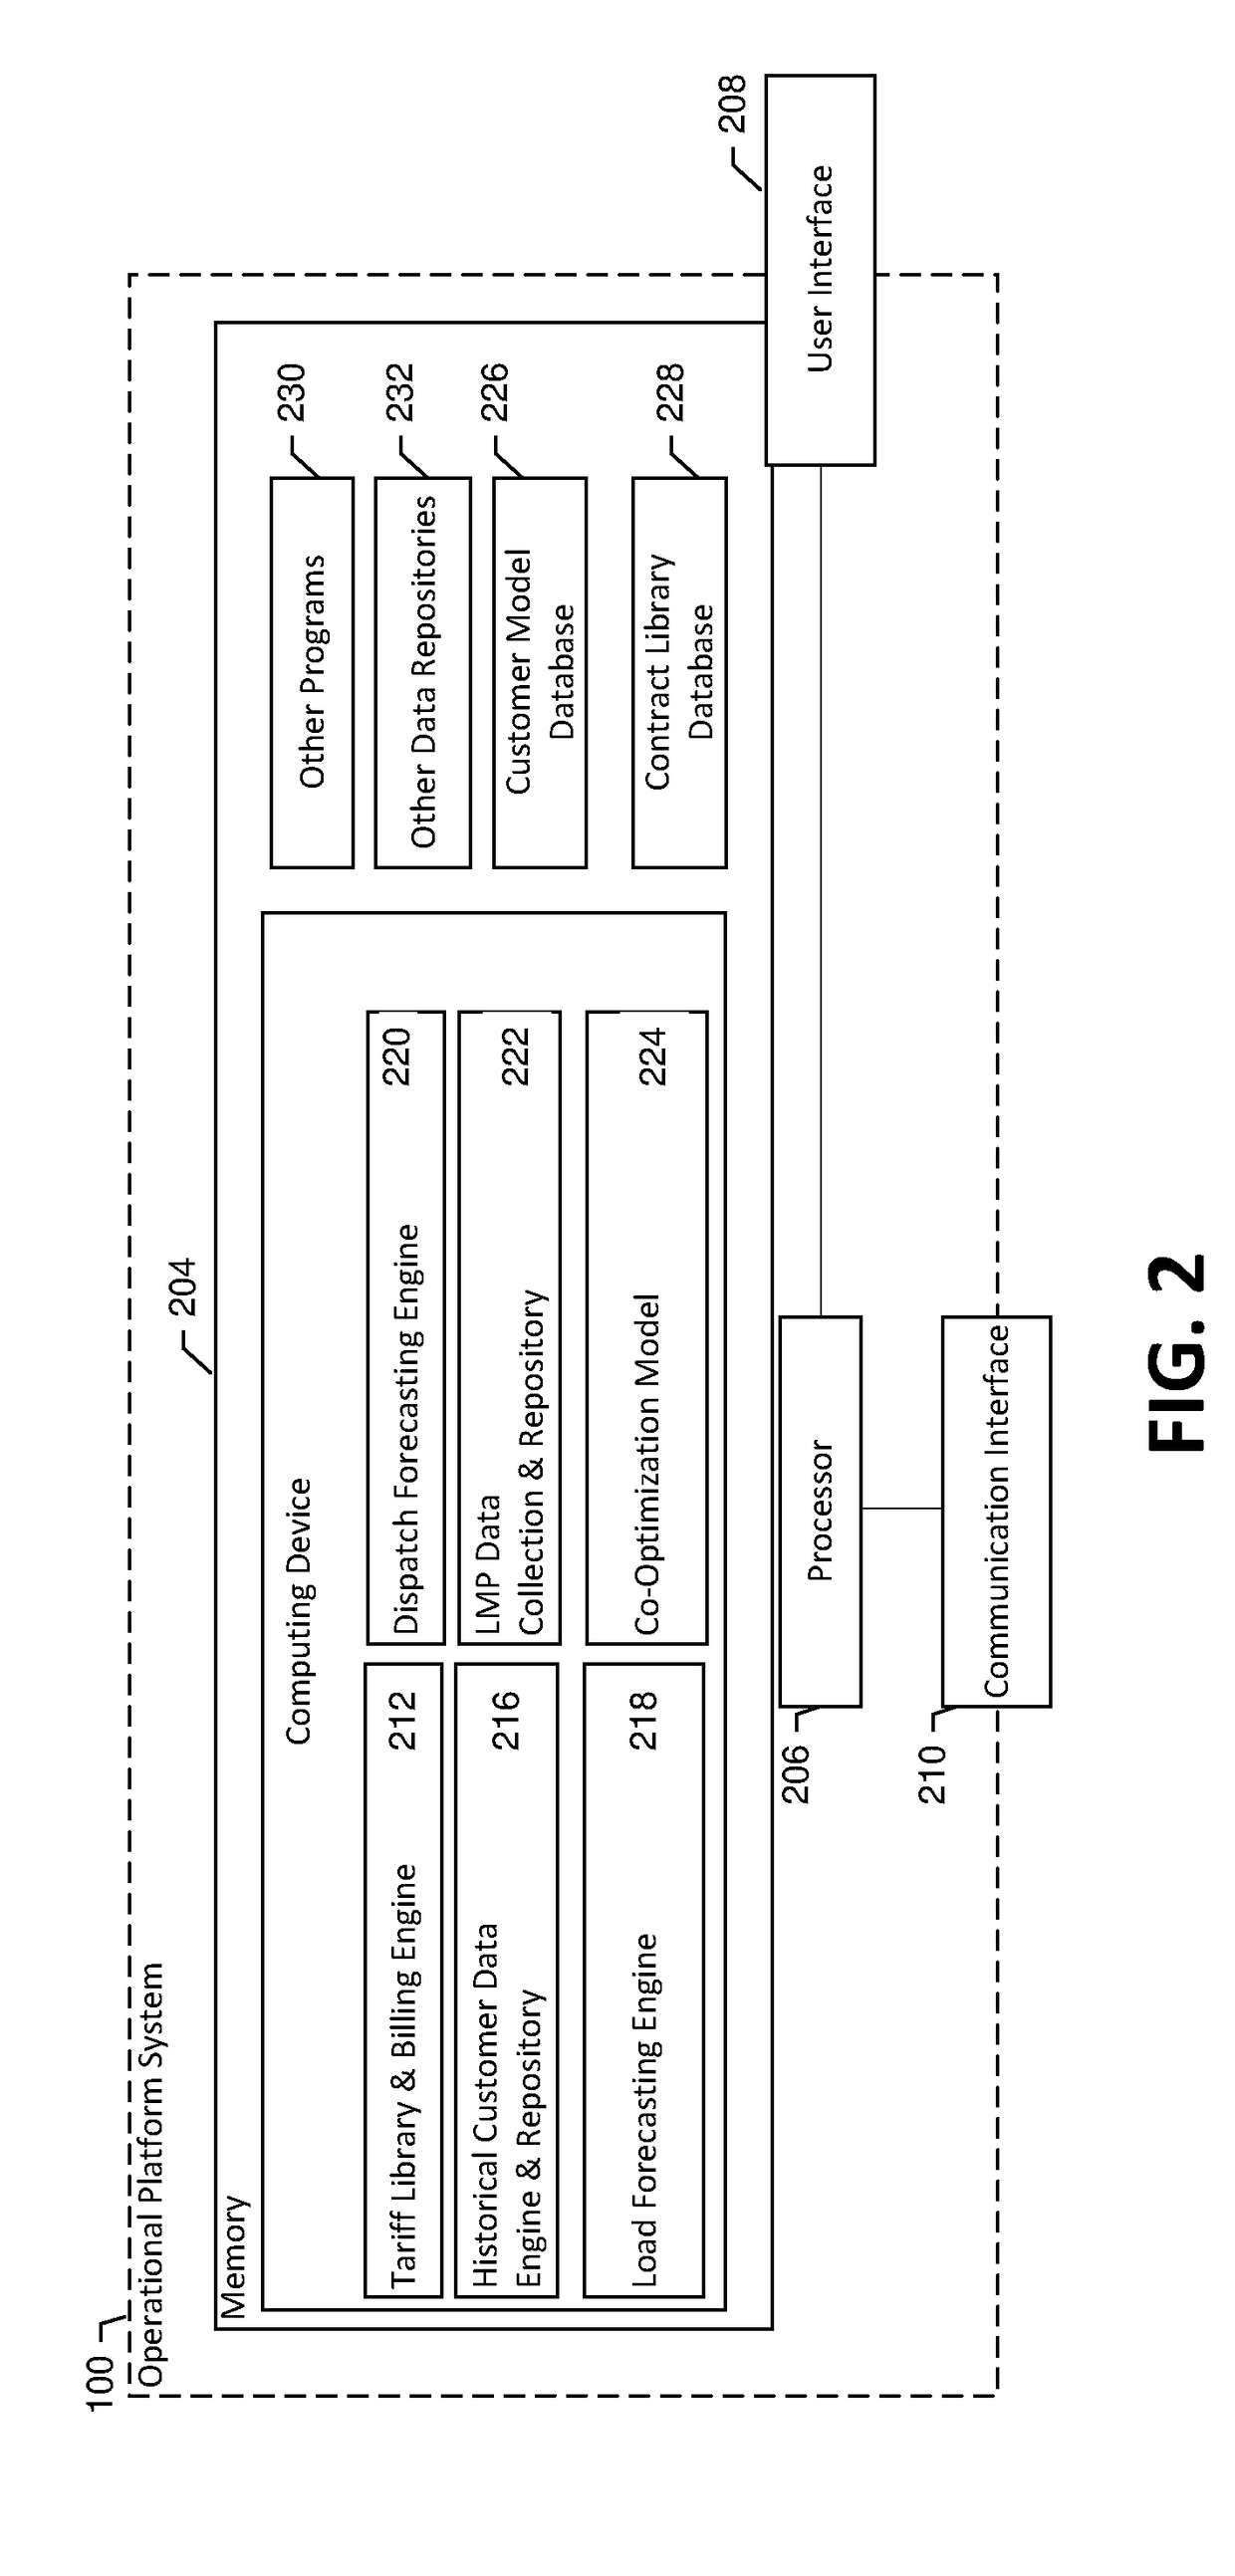 Method and apparatus for facilitating the operation of an on-site energy storage system to co-optimize battery dispatch